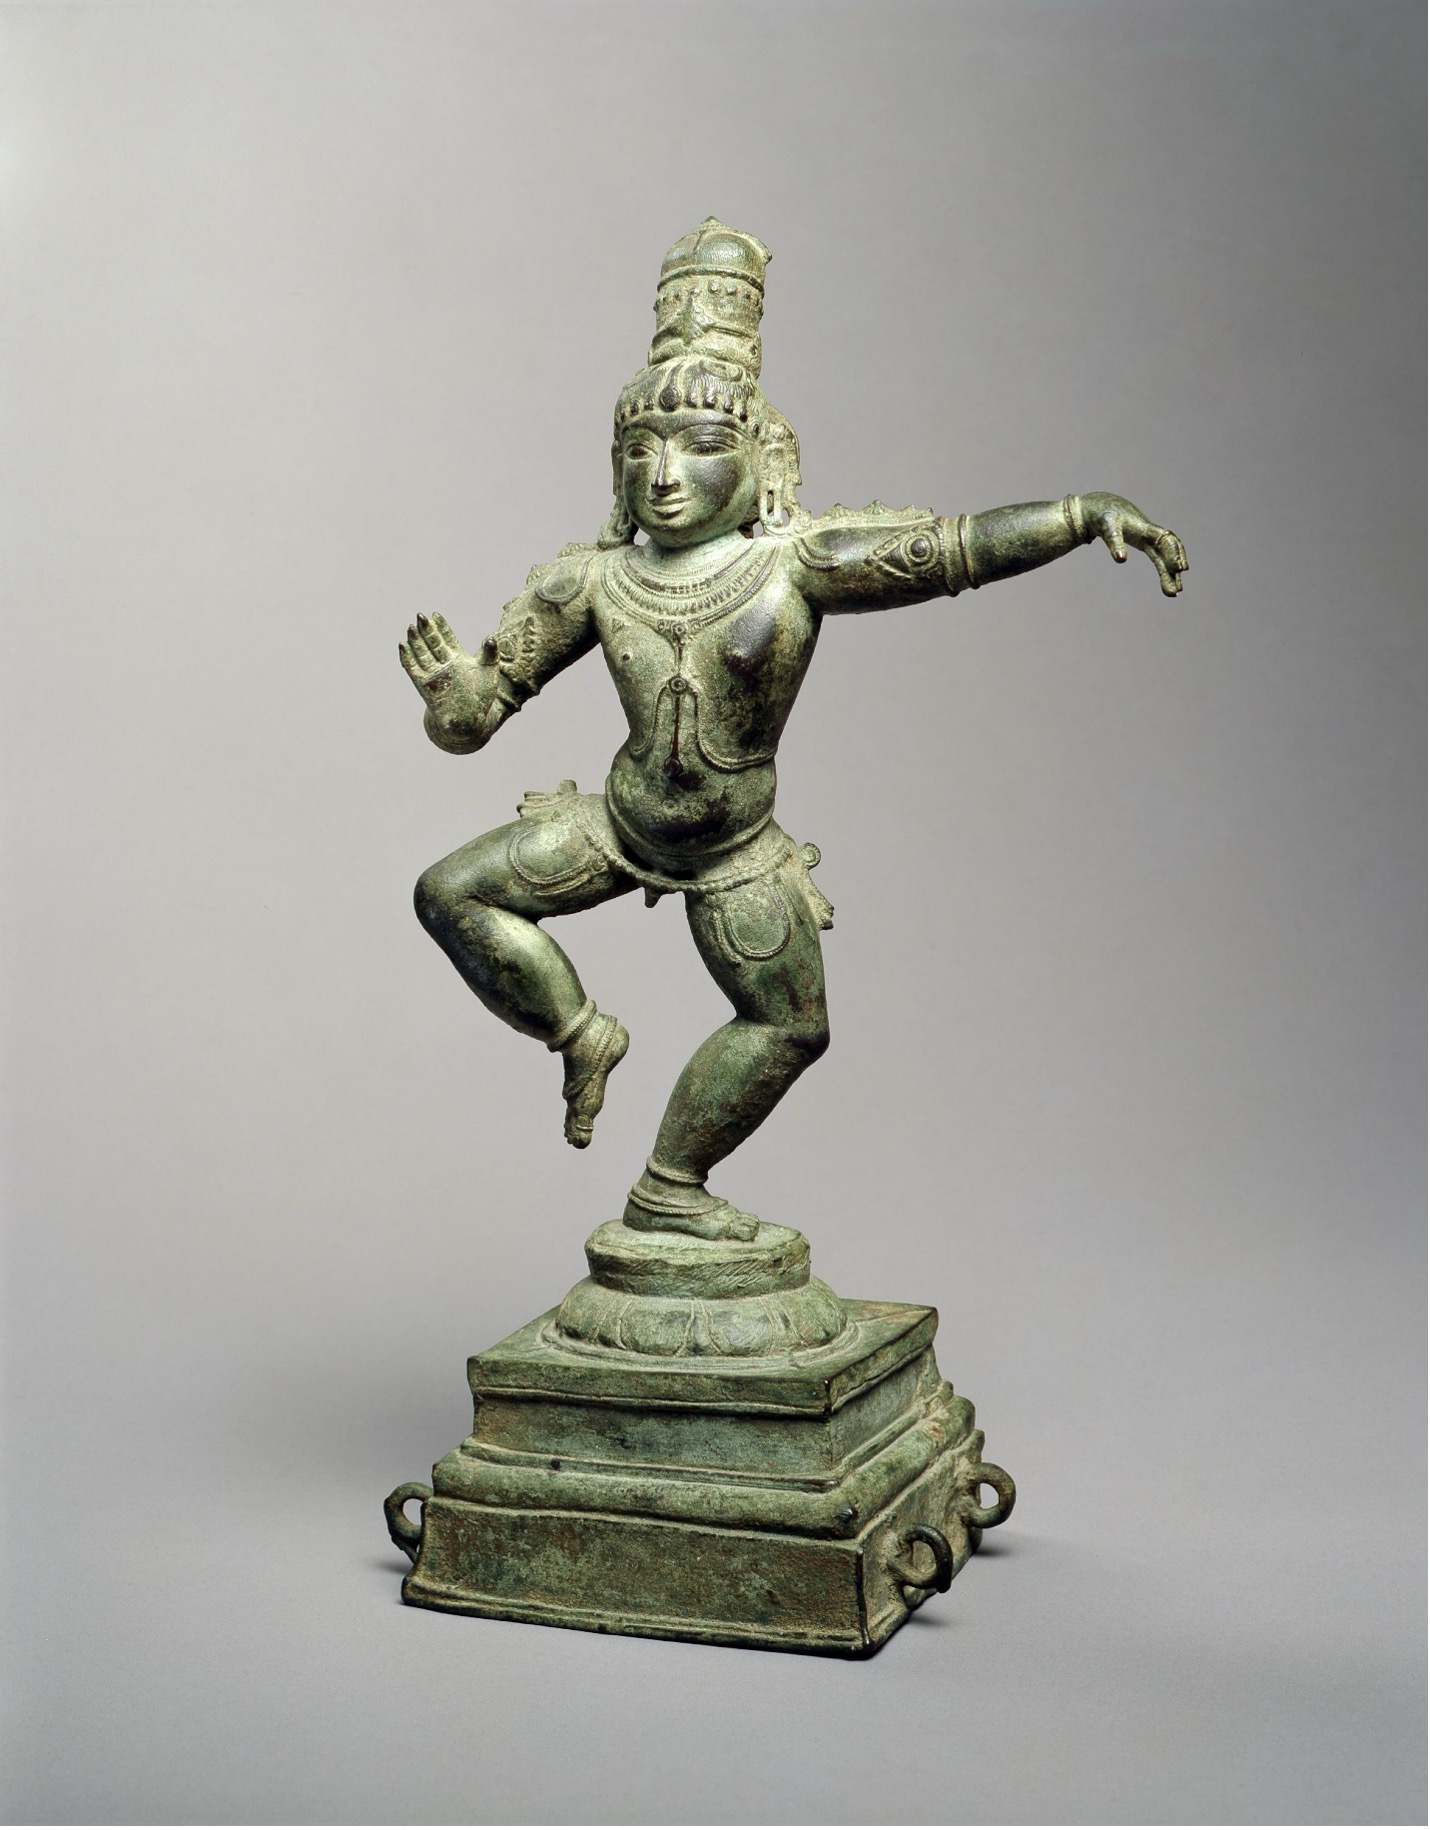 Dancing Balakrishna statue with dynamic pose, left arm extended, standing on one leg on top of pedestal 